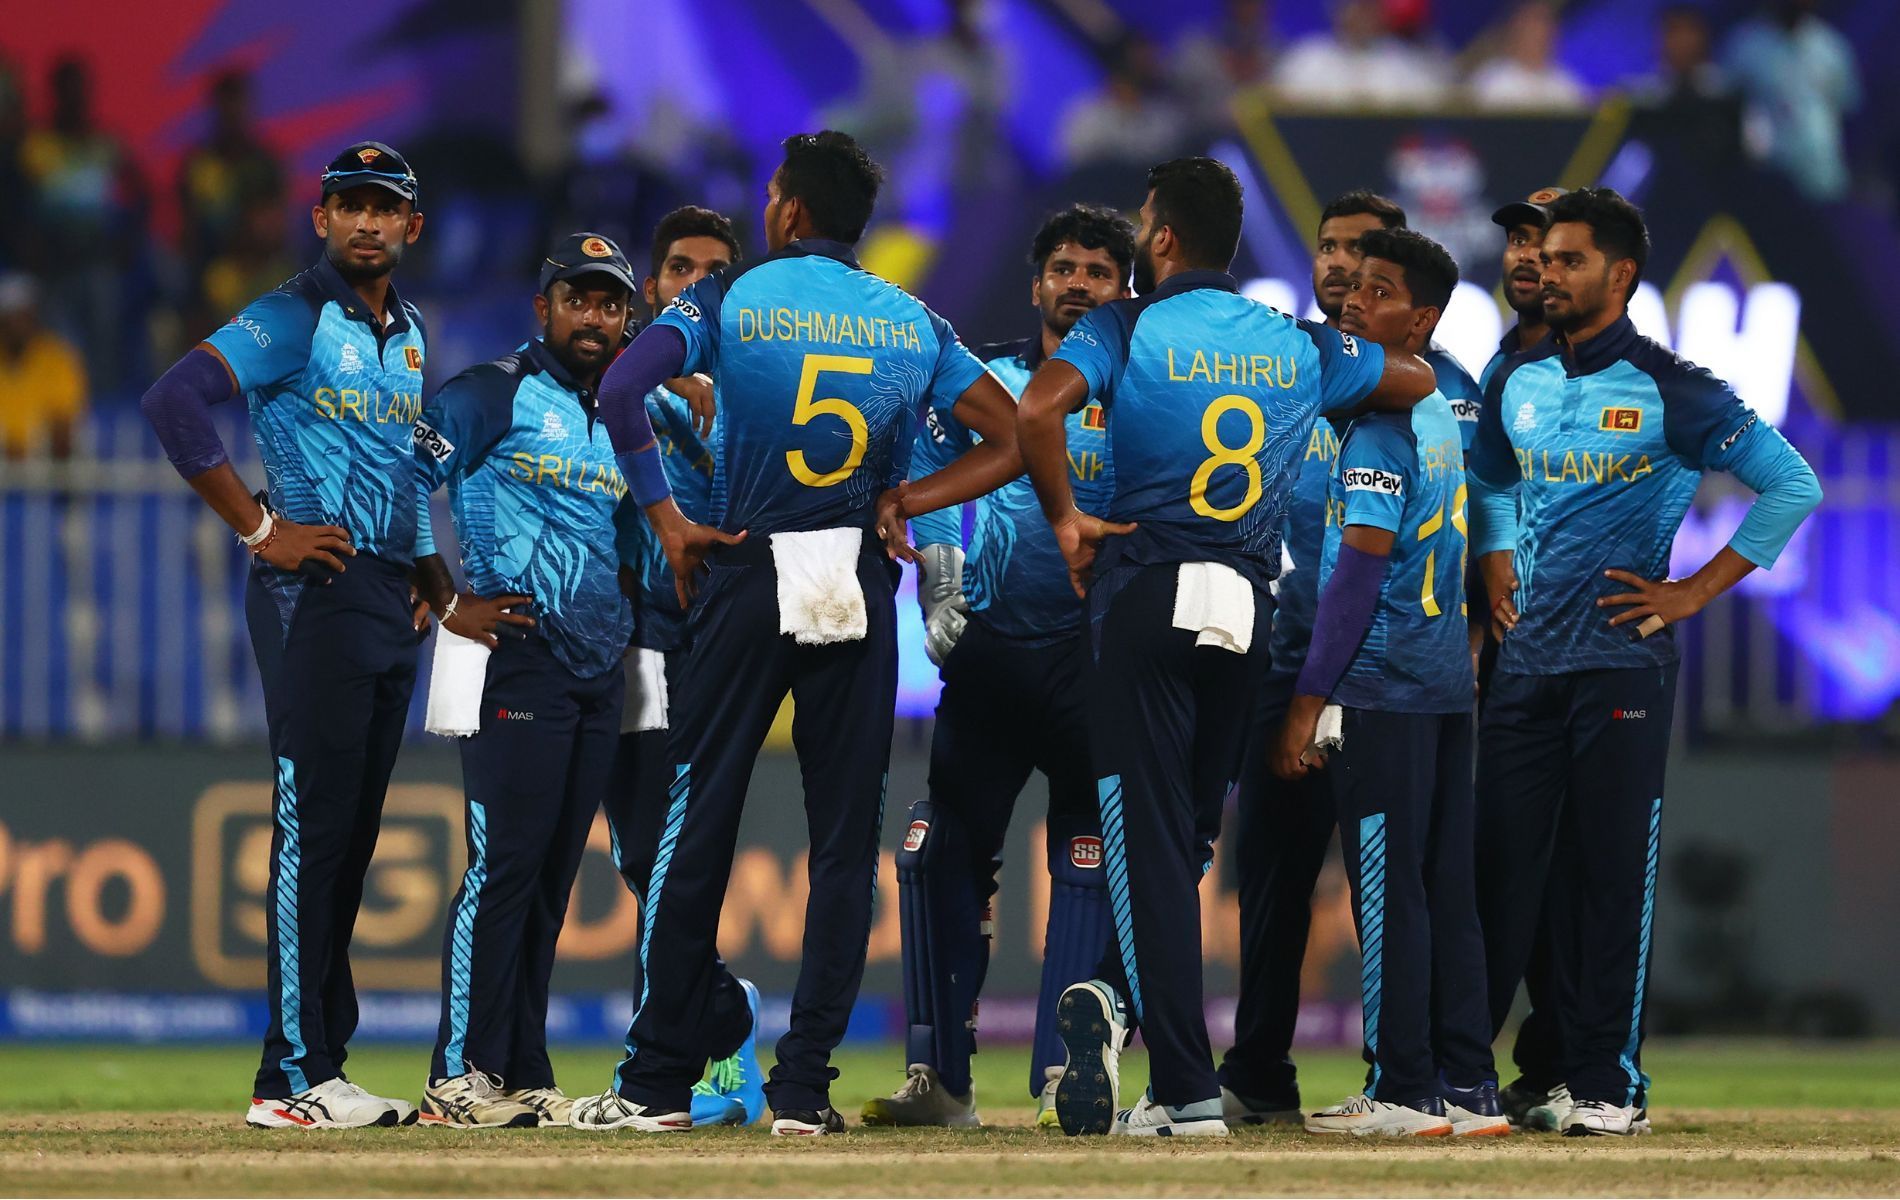 Sri Lanka put in a dominant bowling display against the Netherlands.